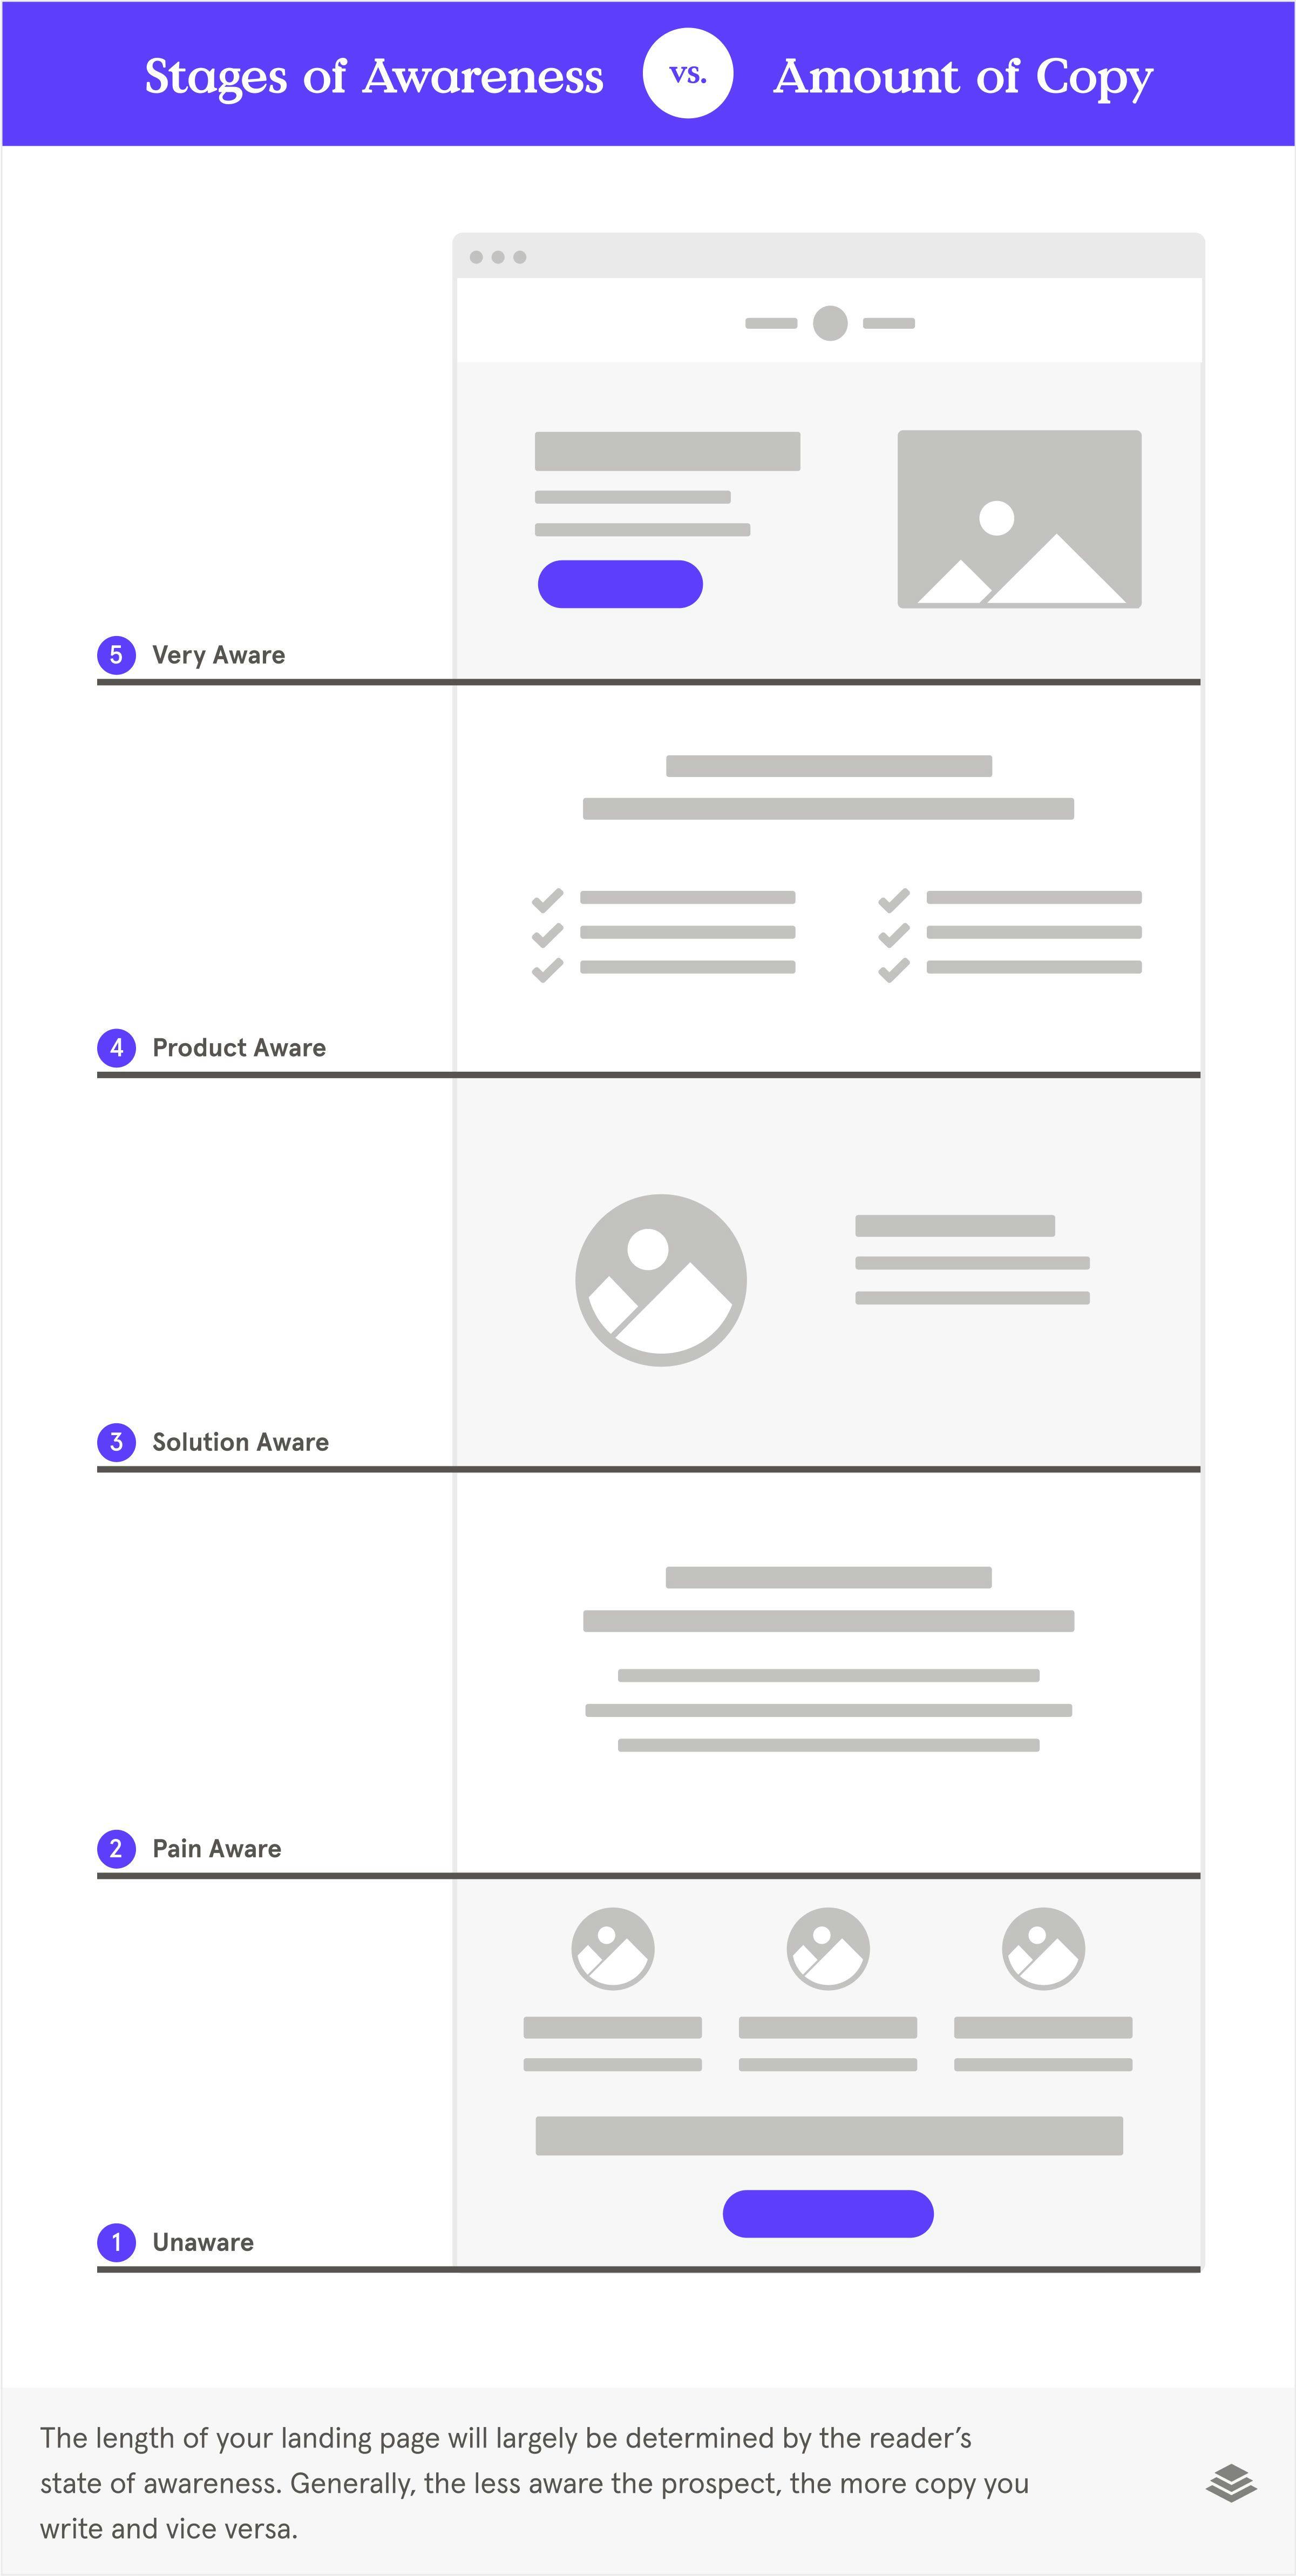 Stages of awareness vs amount of copy on a landing page